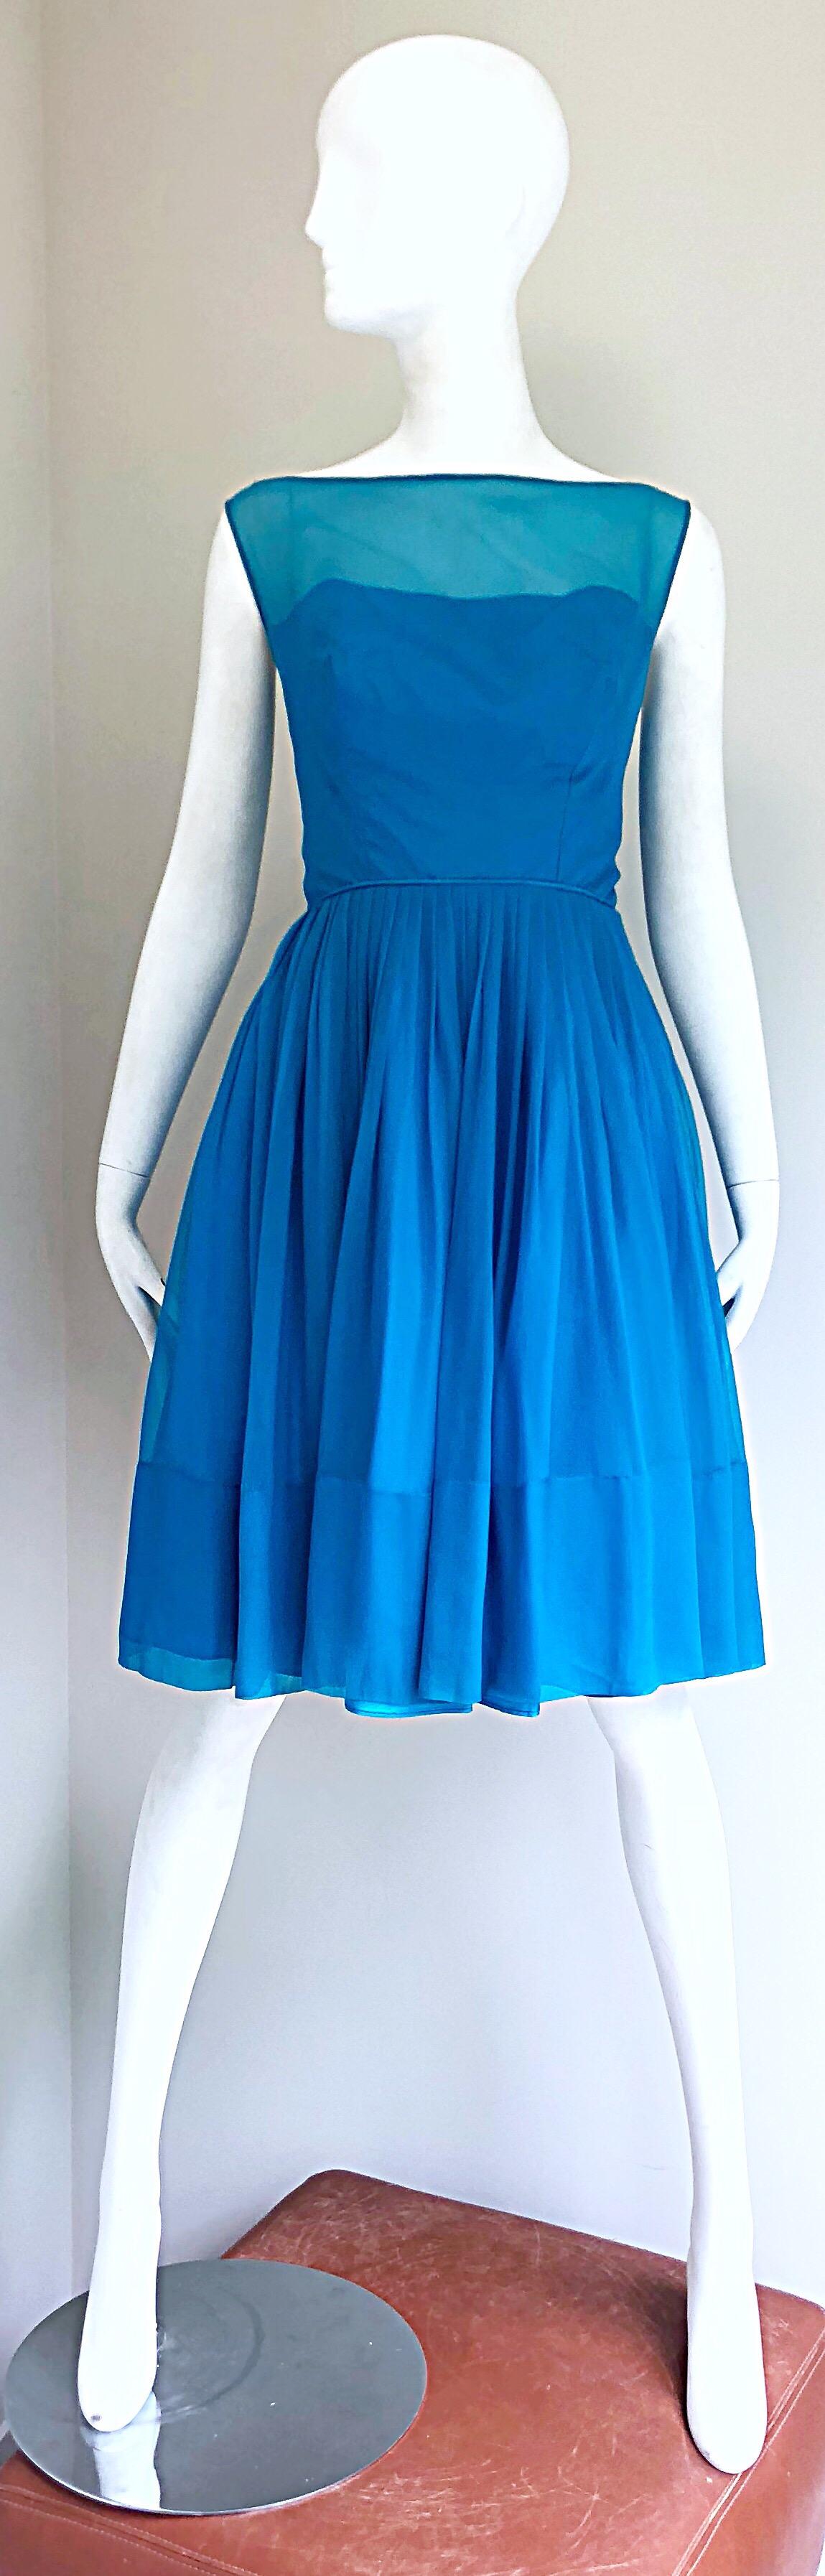 1950s Turquoise Blue Silk Chiffon Nude Illusion Fit n' Flare Vintage 50s Dress 7